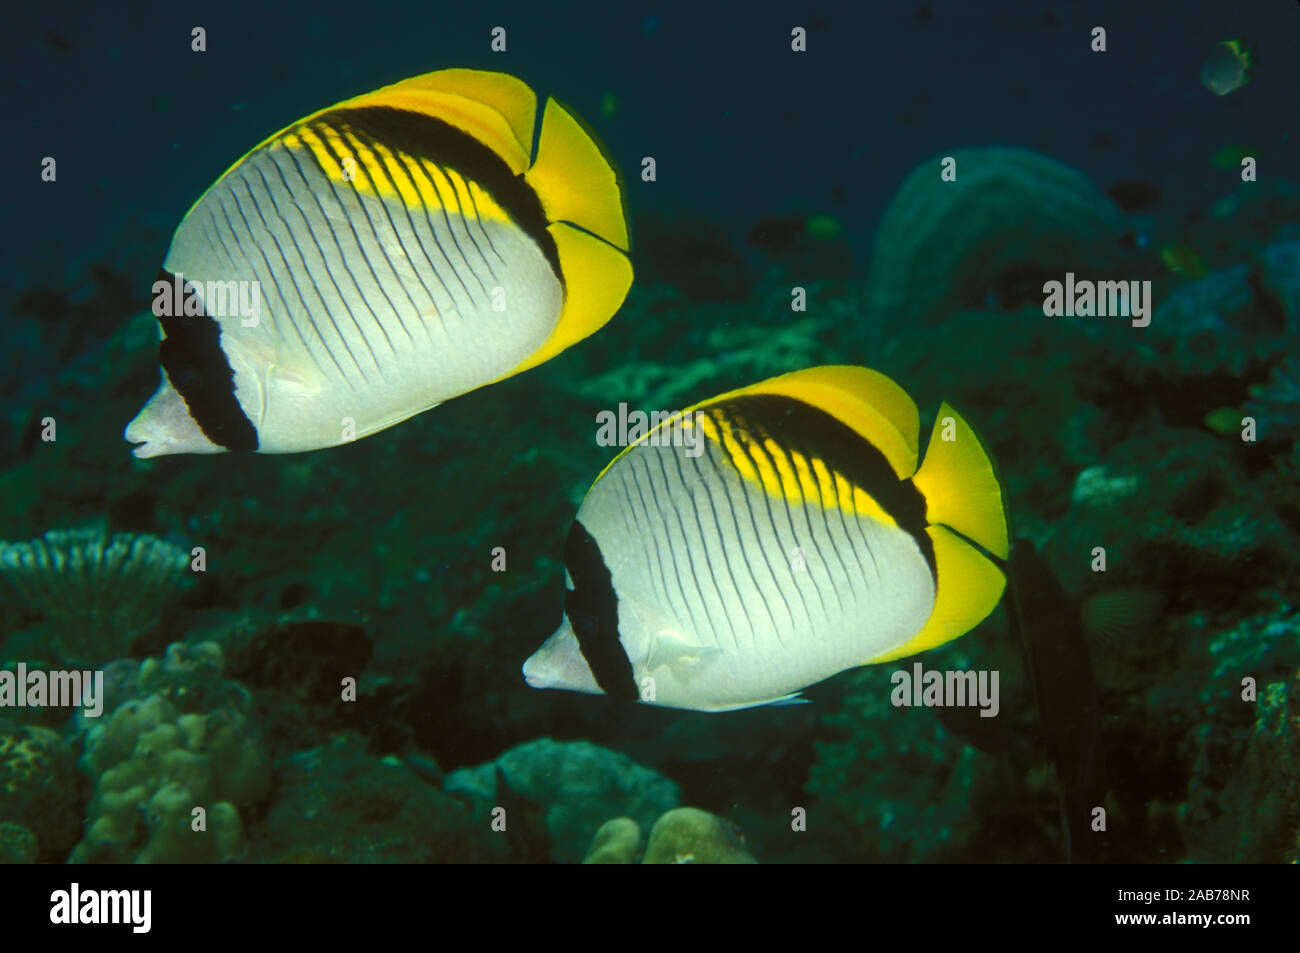 Lined butterflyfish (Chaetodon lineolatus), feeds mainly on coral polyps and anemones. Forms pairs when breeding. Bali, Indonesia Stock Photo